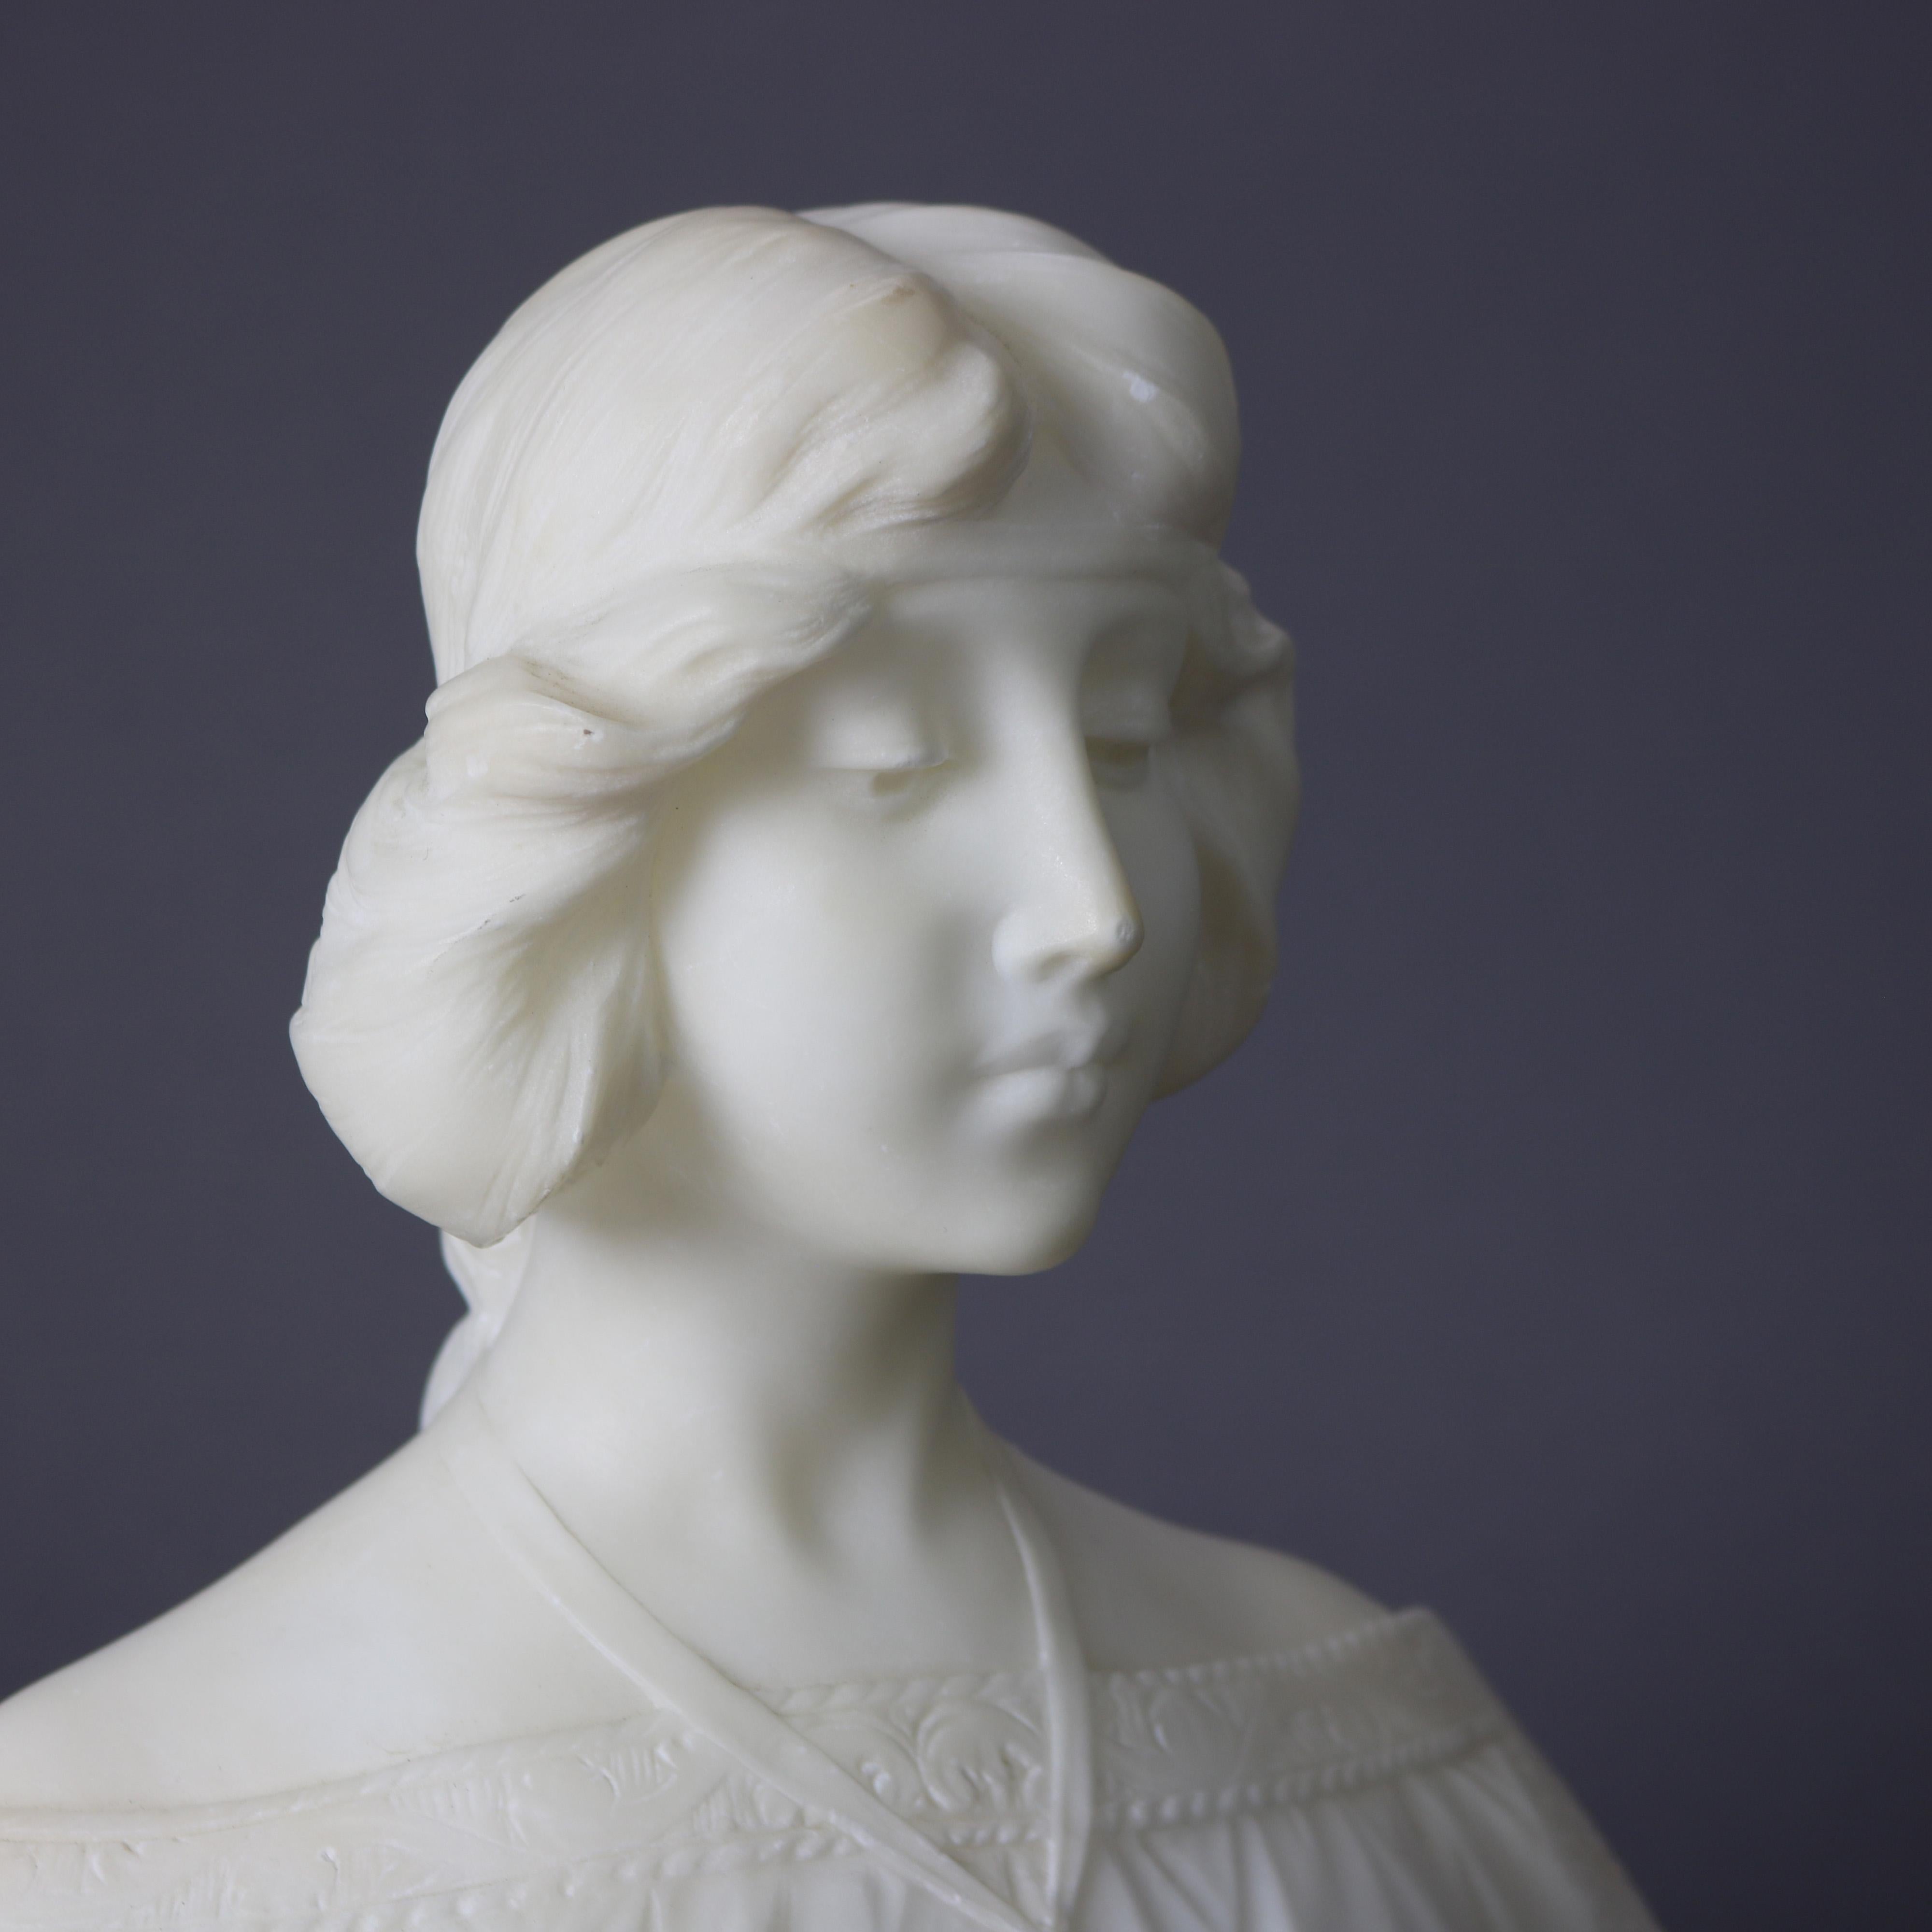 Carved Antique Alabaster Sculpture Bust of a Woman on Black Marble Plinth, circa 1890